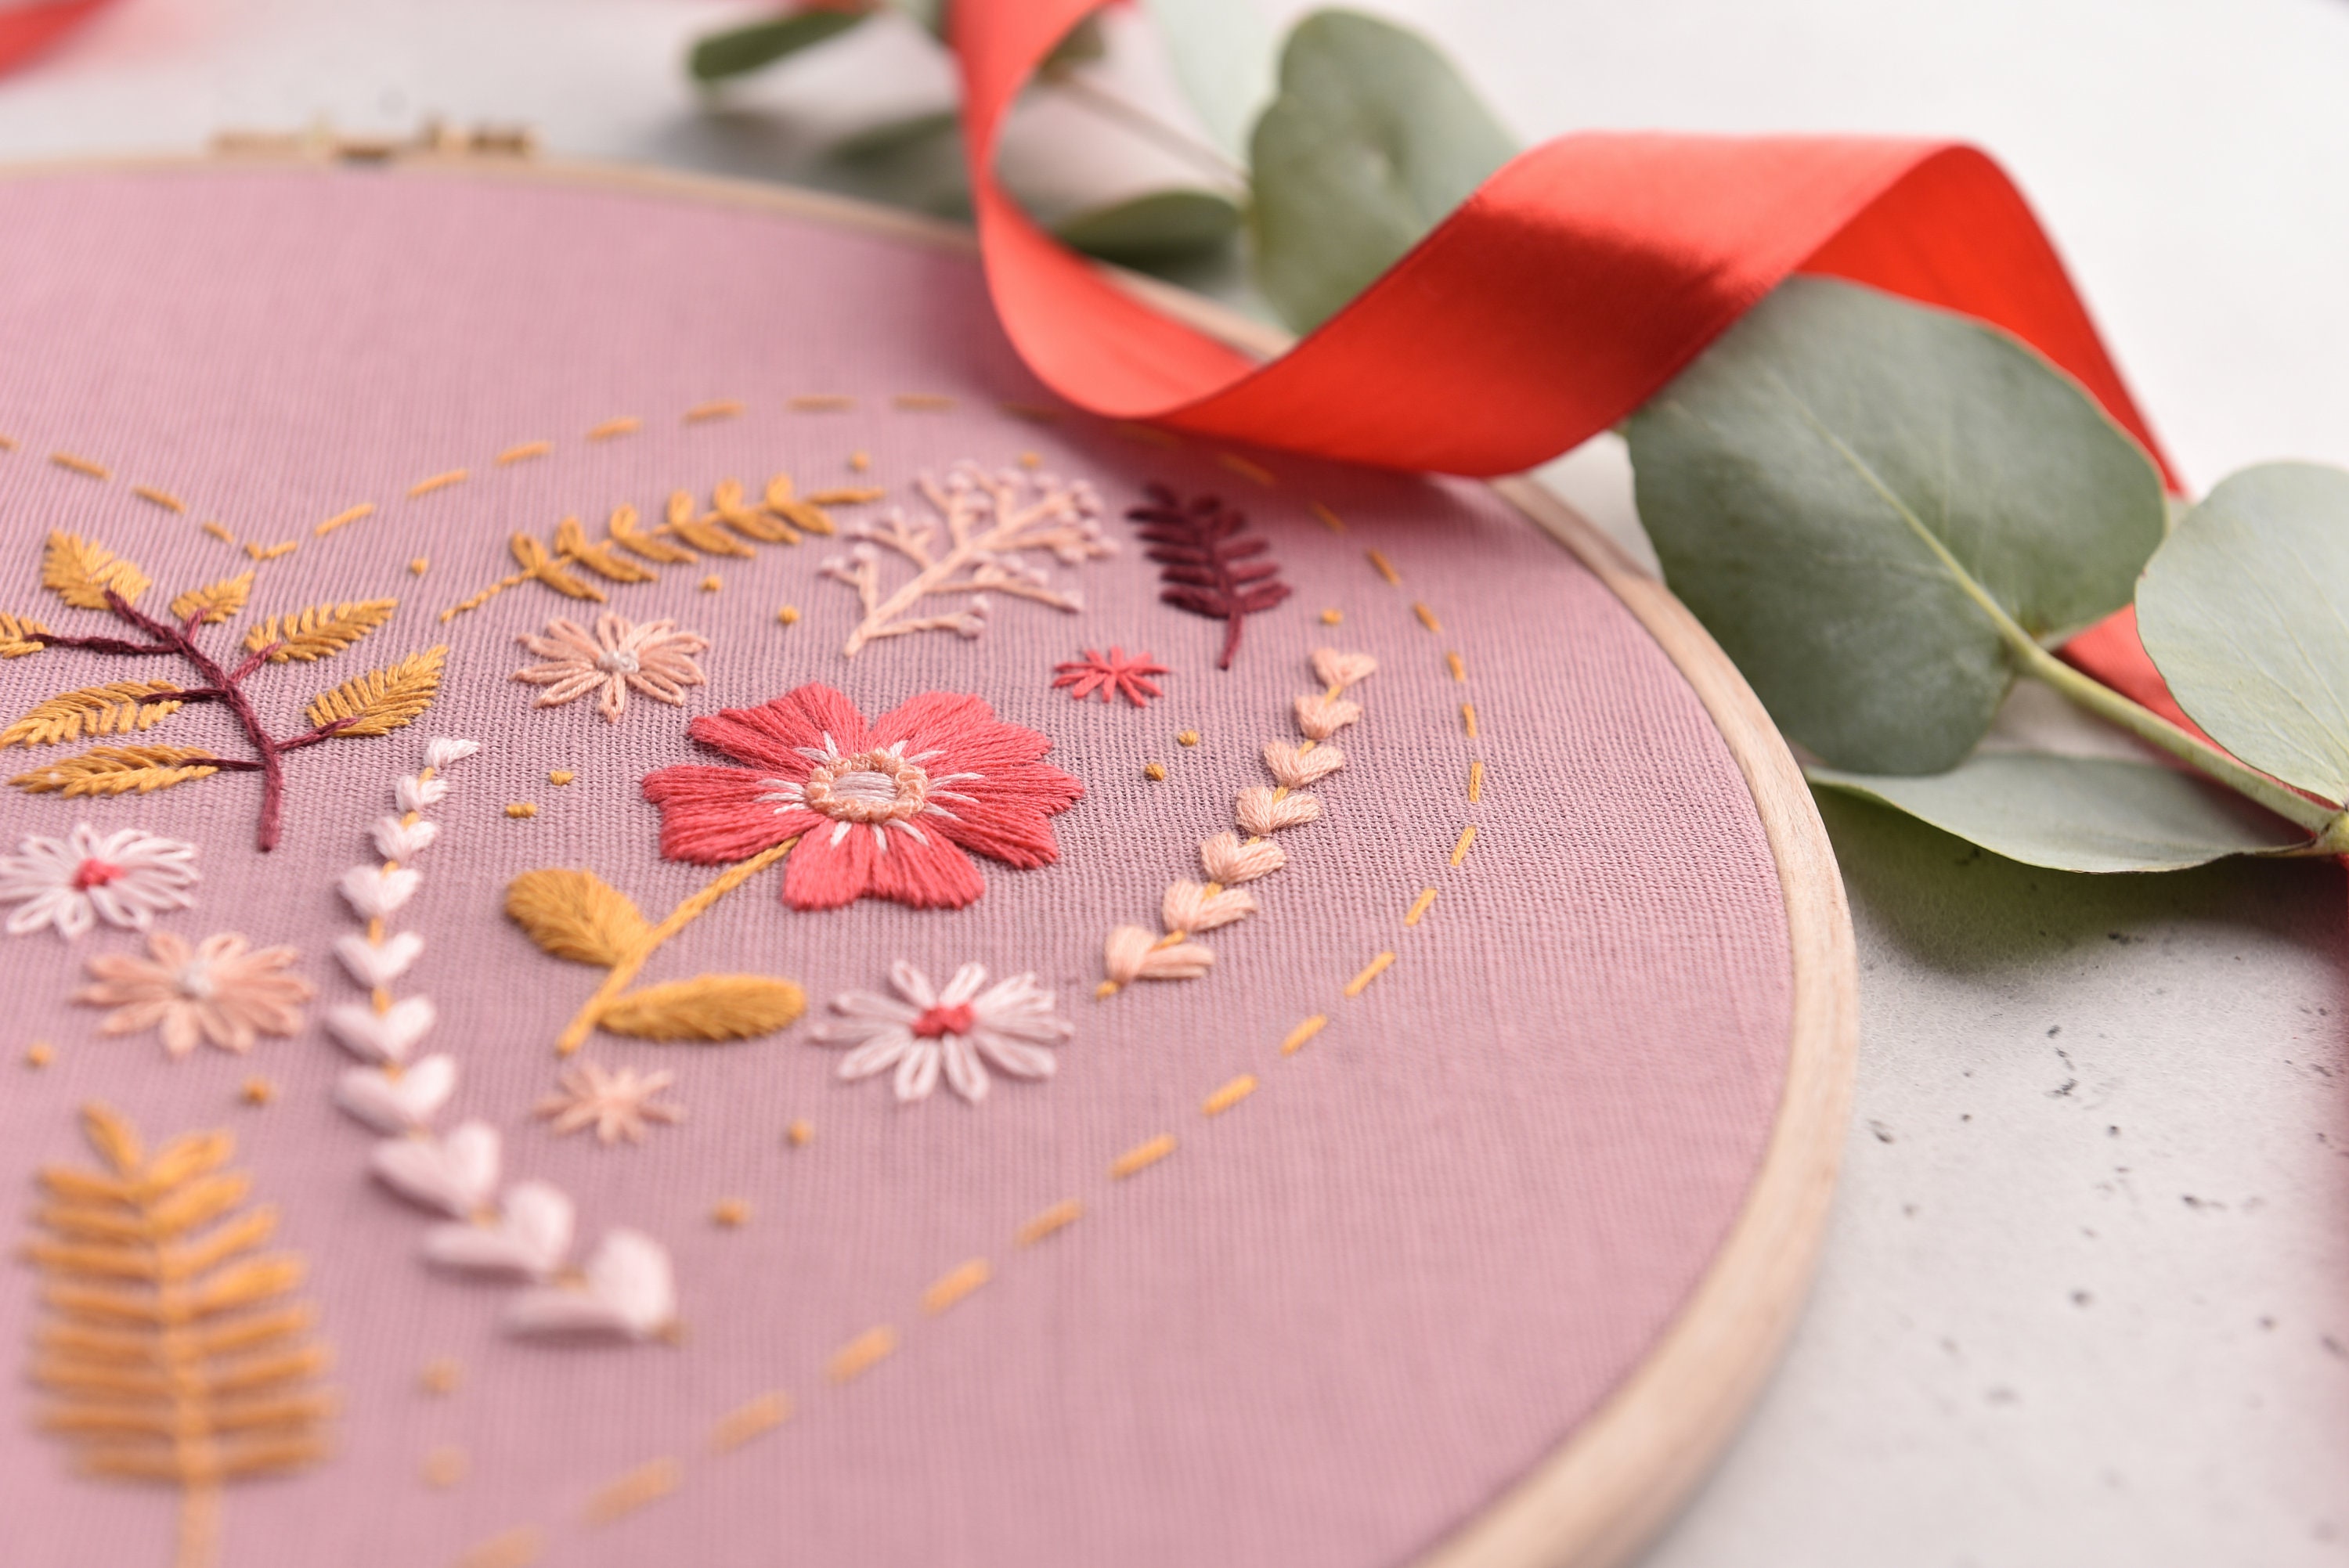 Floral heart embroidery PDF pattern video tutorial love | Etsy